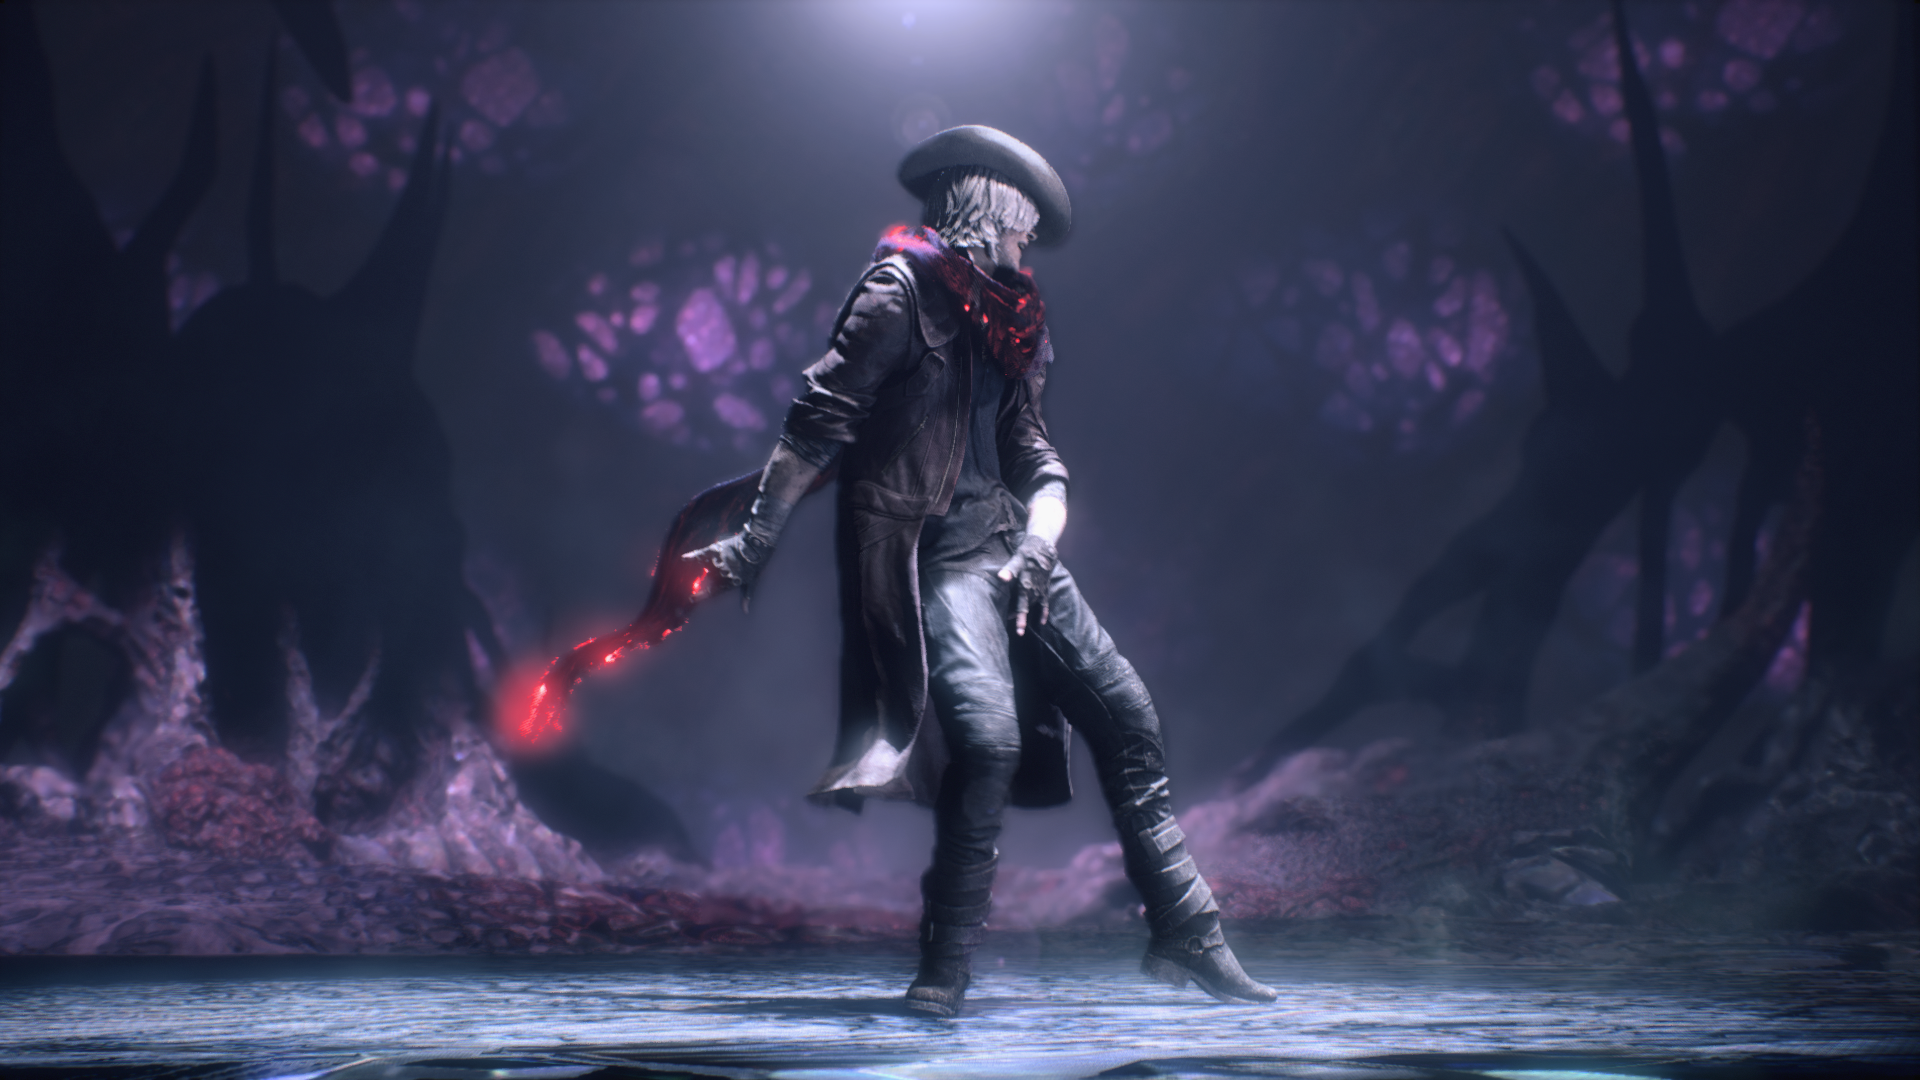 Wallpaper : Devil May Cry, Dante, darkness, screenshot, computer wallpaper,  special effects, pc game, action film, devil may cry 5 1920x1080 - wallup -  577579 - HD Wallpapers - WallHere